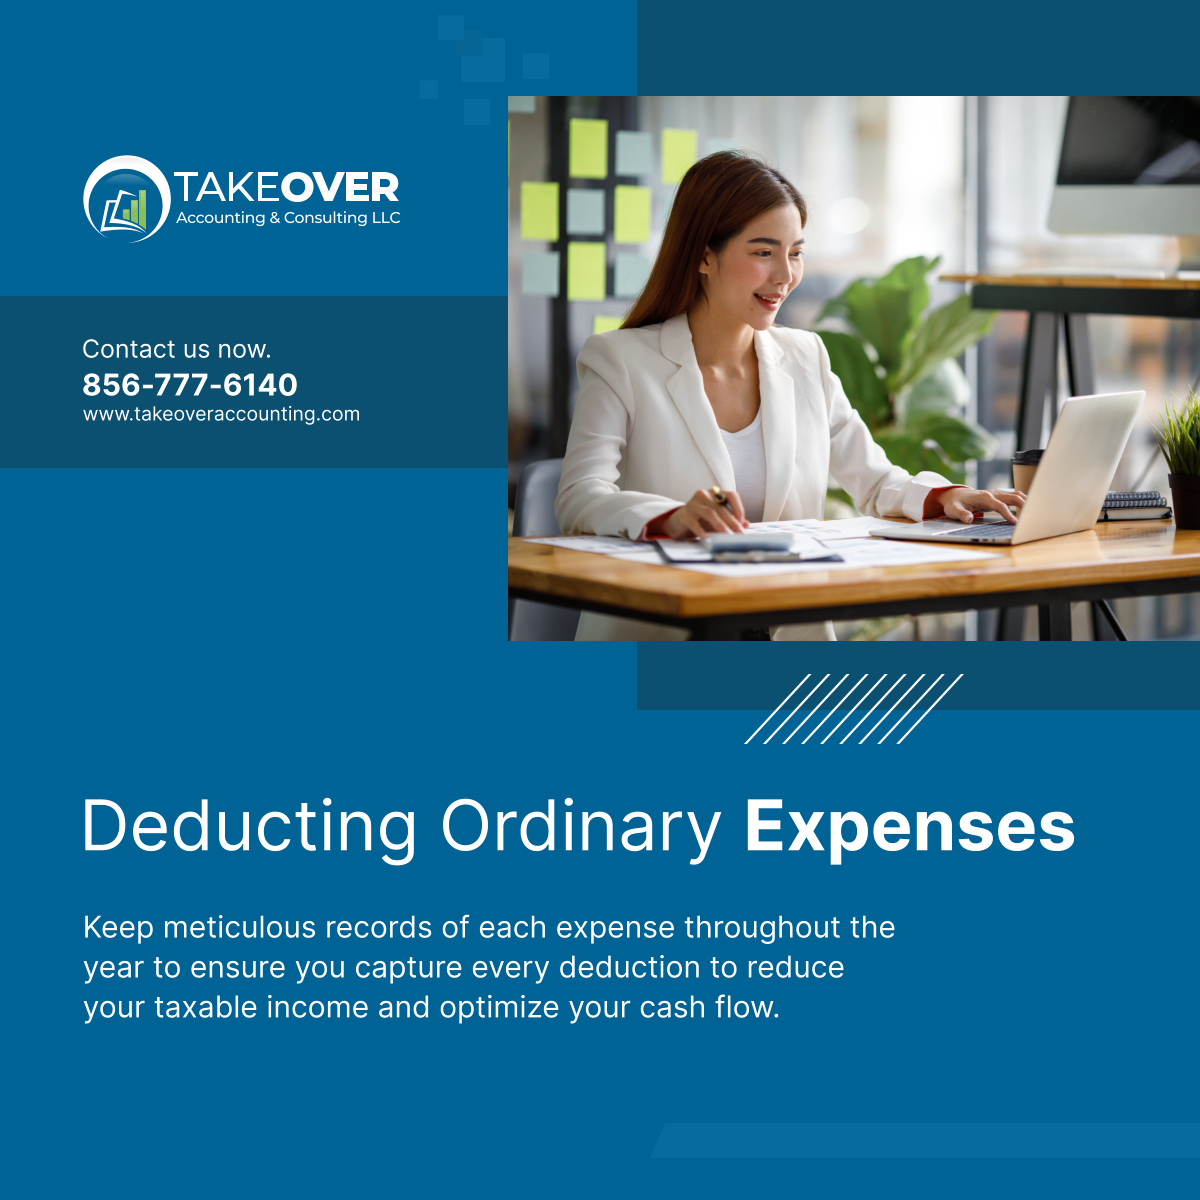 Your small business incurs various costs to keep operations running smoothly. From office supplies to utility bills and rent, these ordinary and necessary expenses are deductible. 

#CherryHillNJ #AccountingServices #OrdinaryExpenses